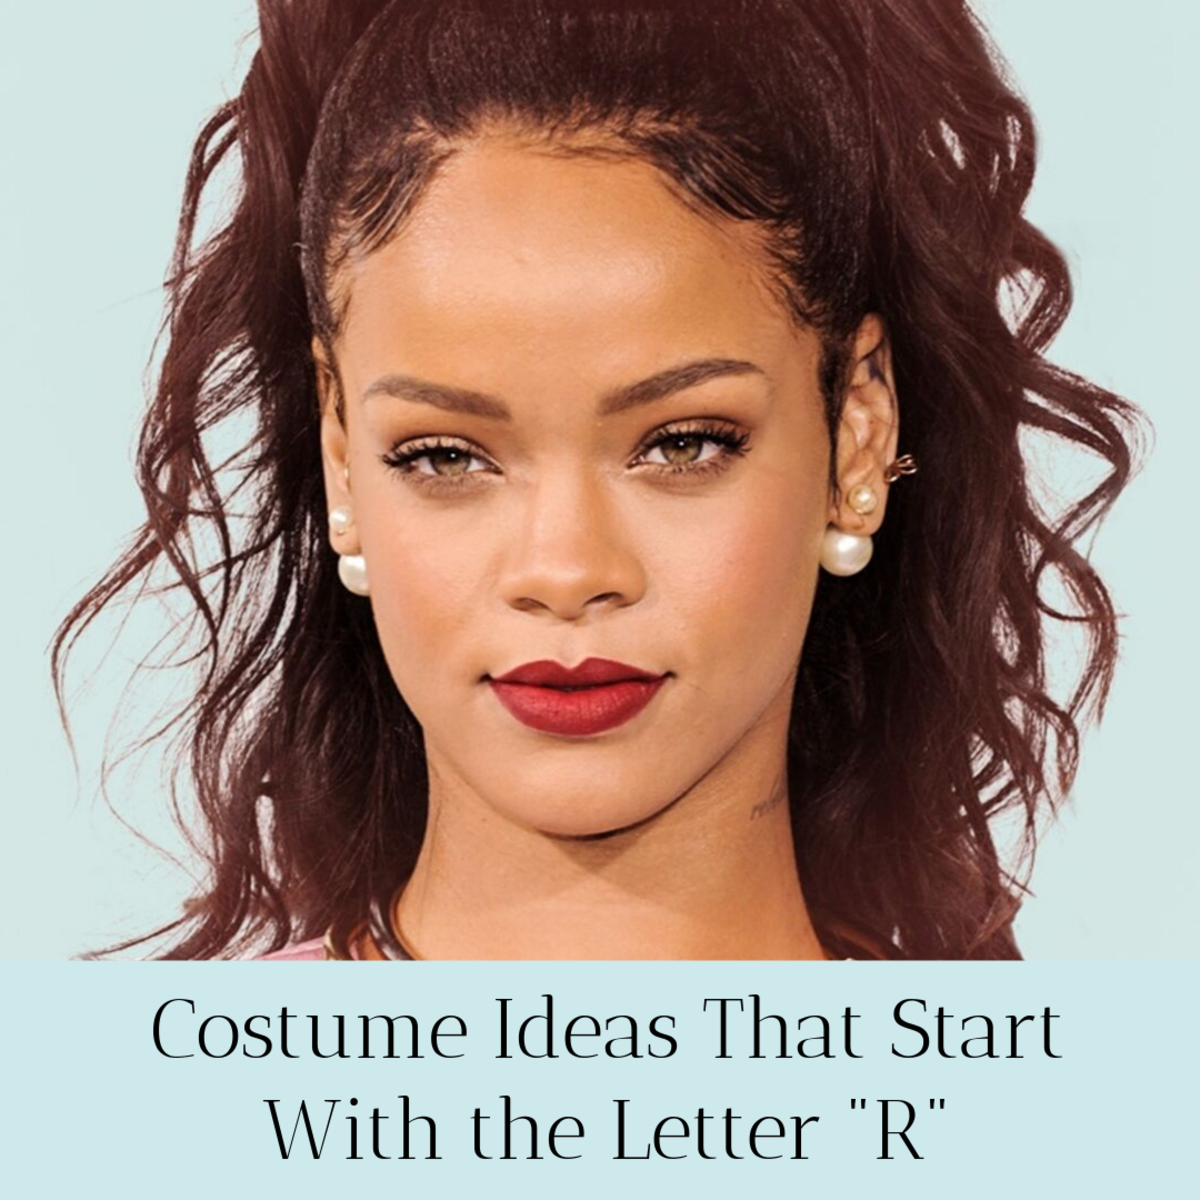 Check out this guide on ideas for costumes that begin with the letter "R." Luckily, there's no shortage of Rihanna looks to emulate!